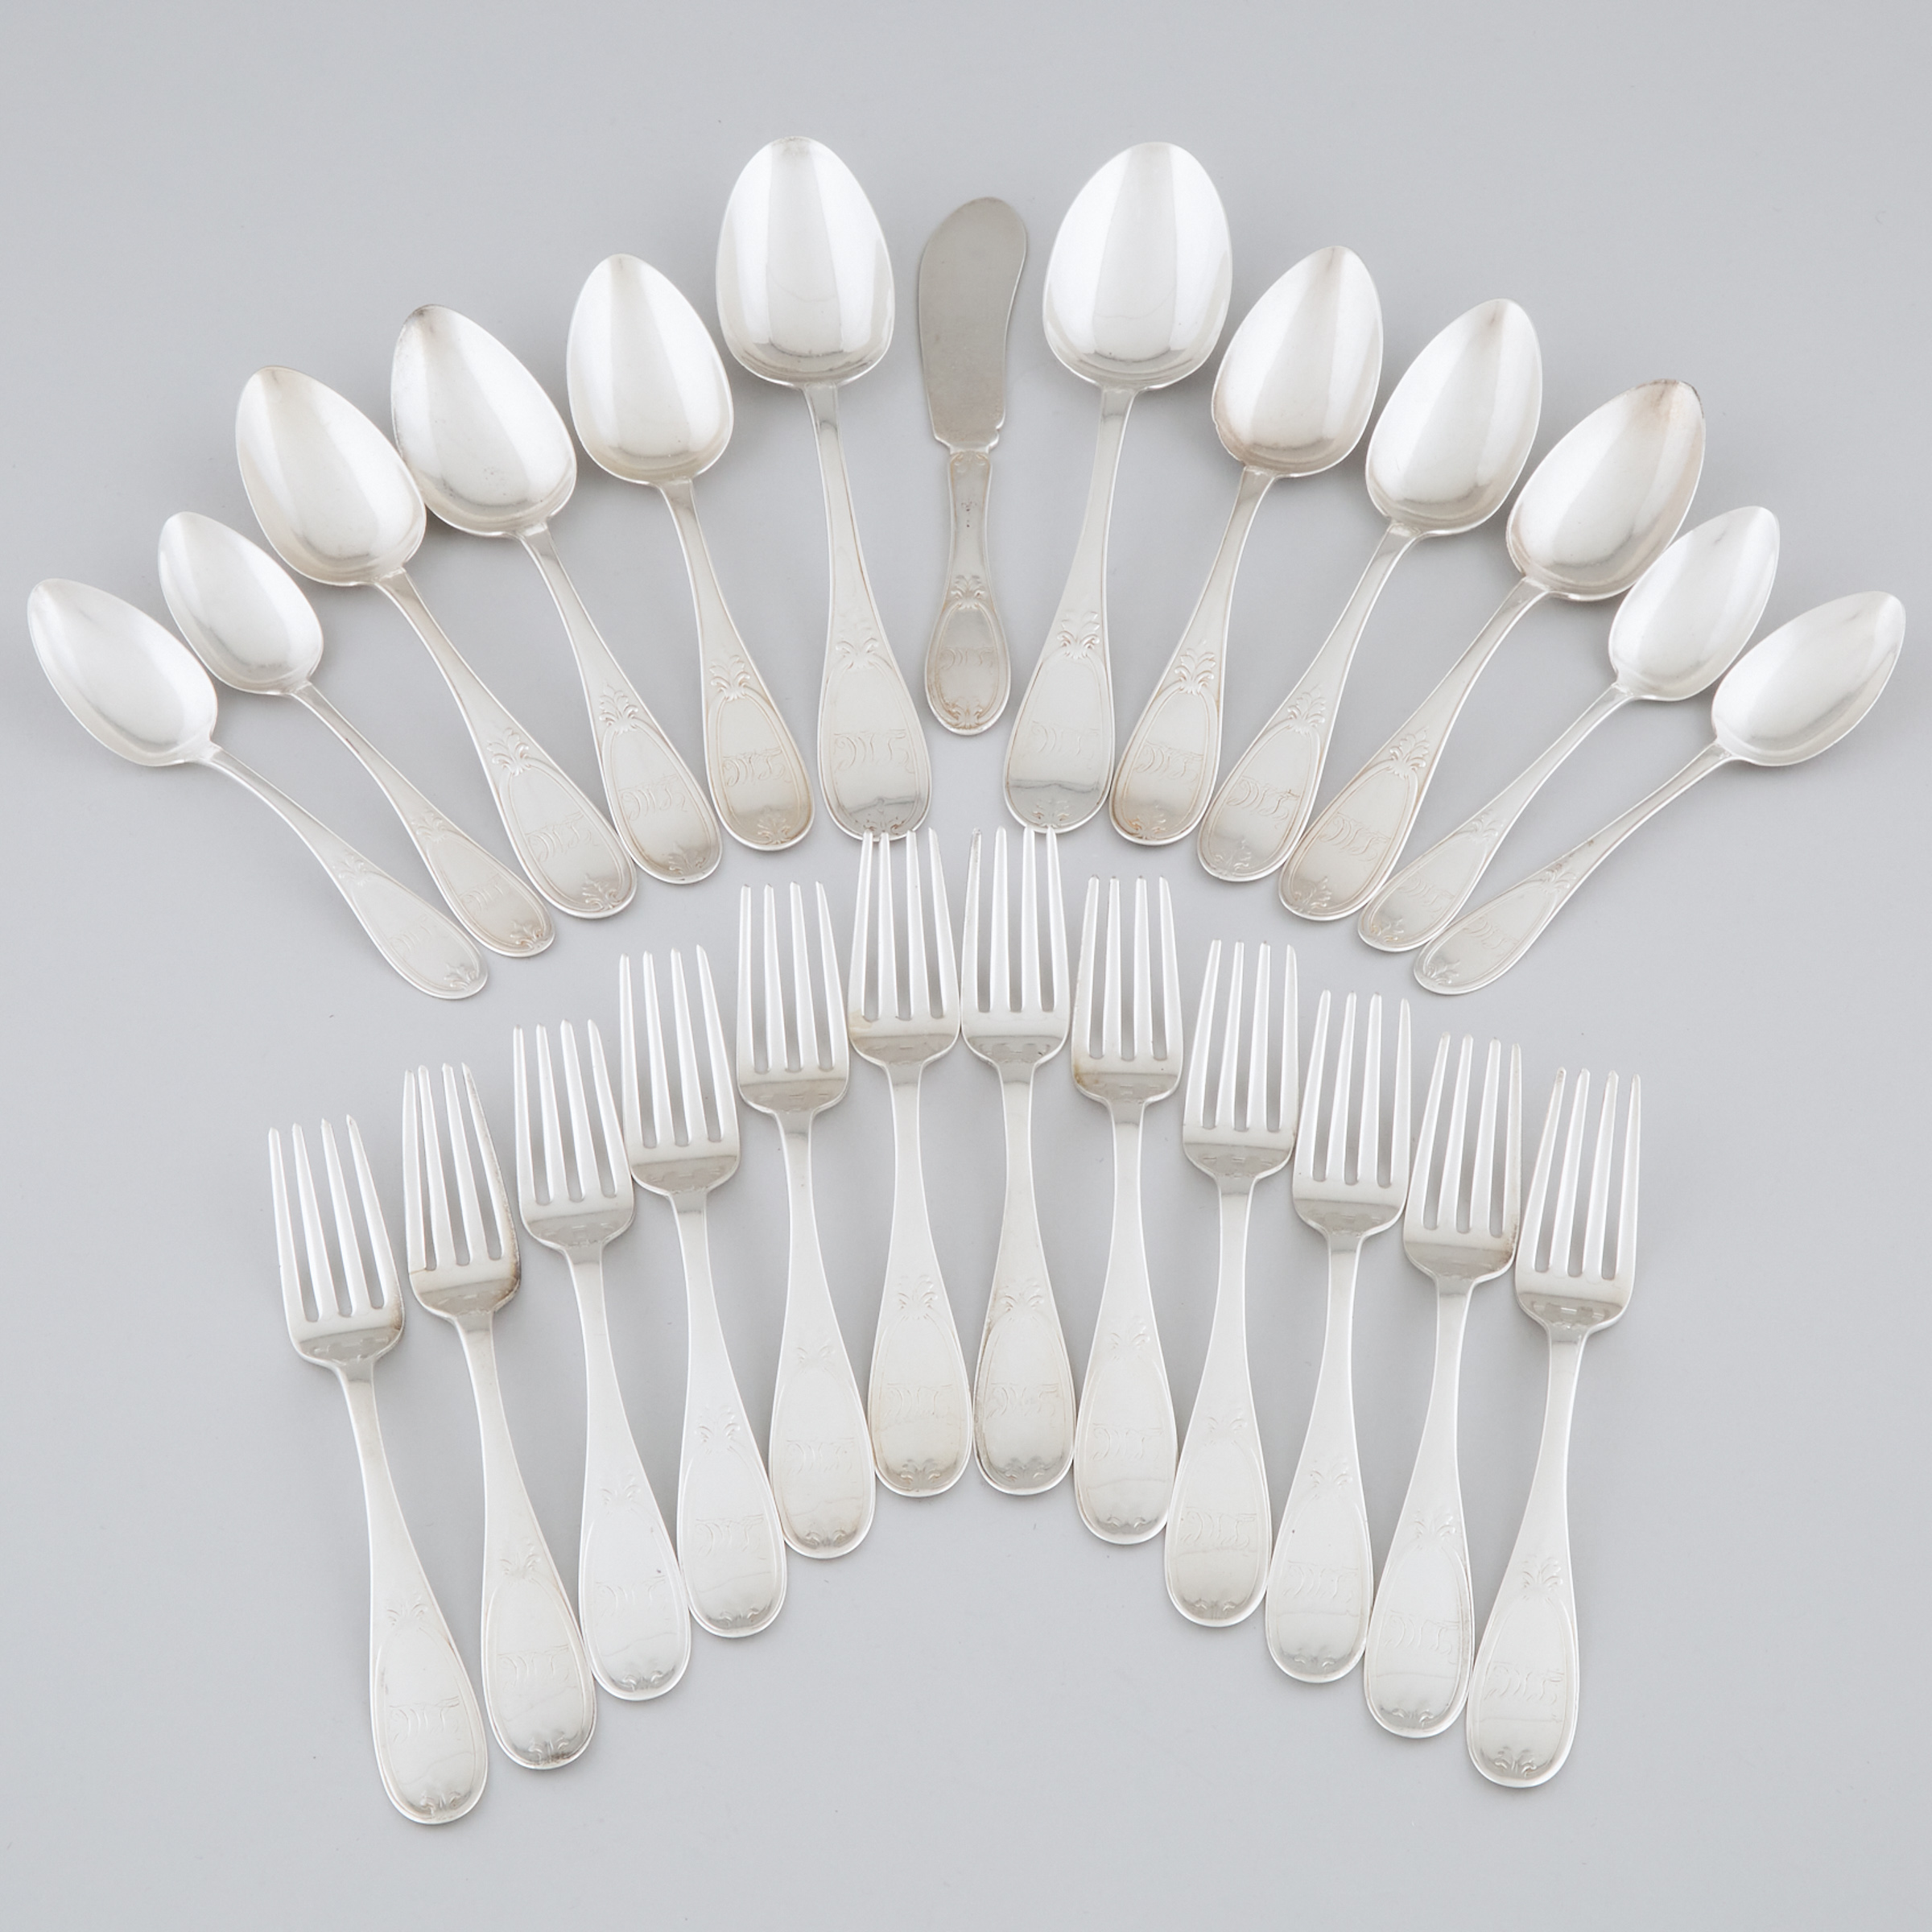 Group of American Silver Flatware, George W. Webb, Baltimore, Md., 1877-86